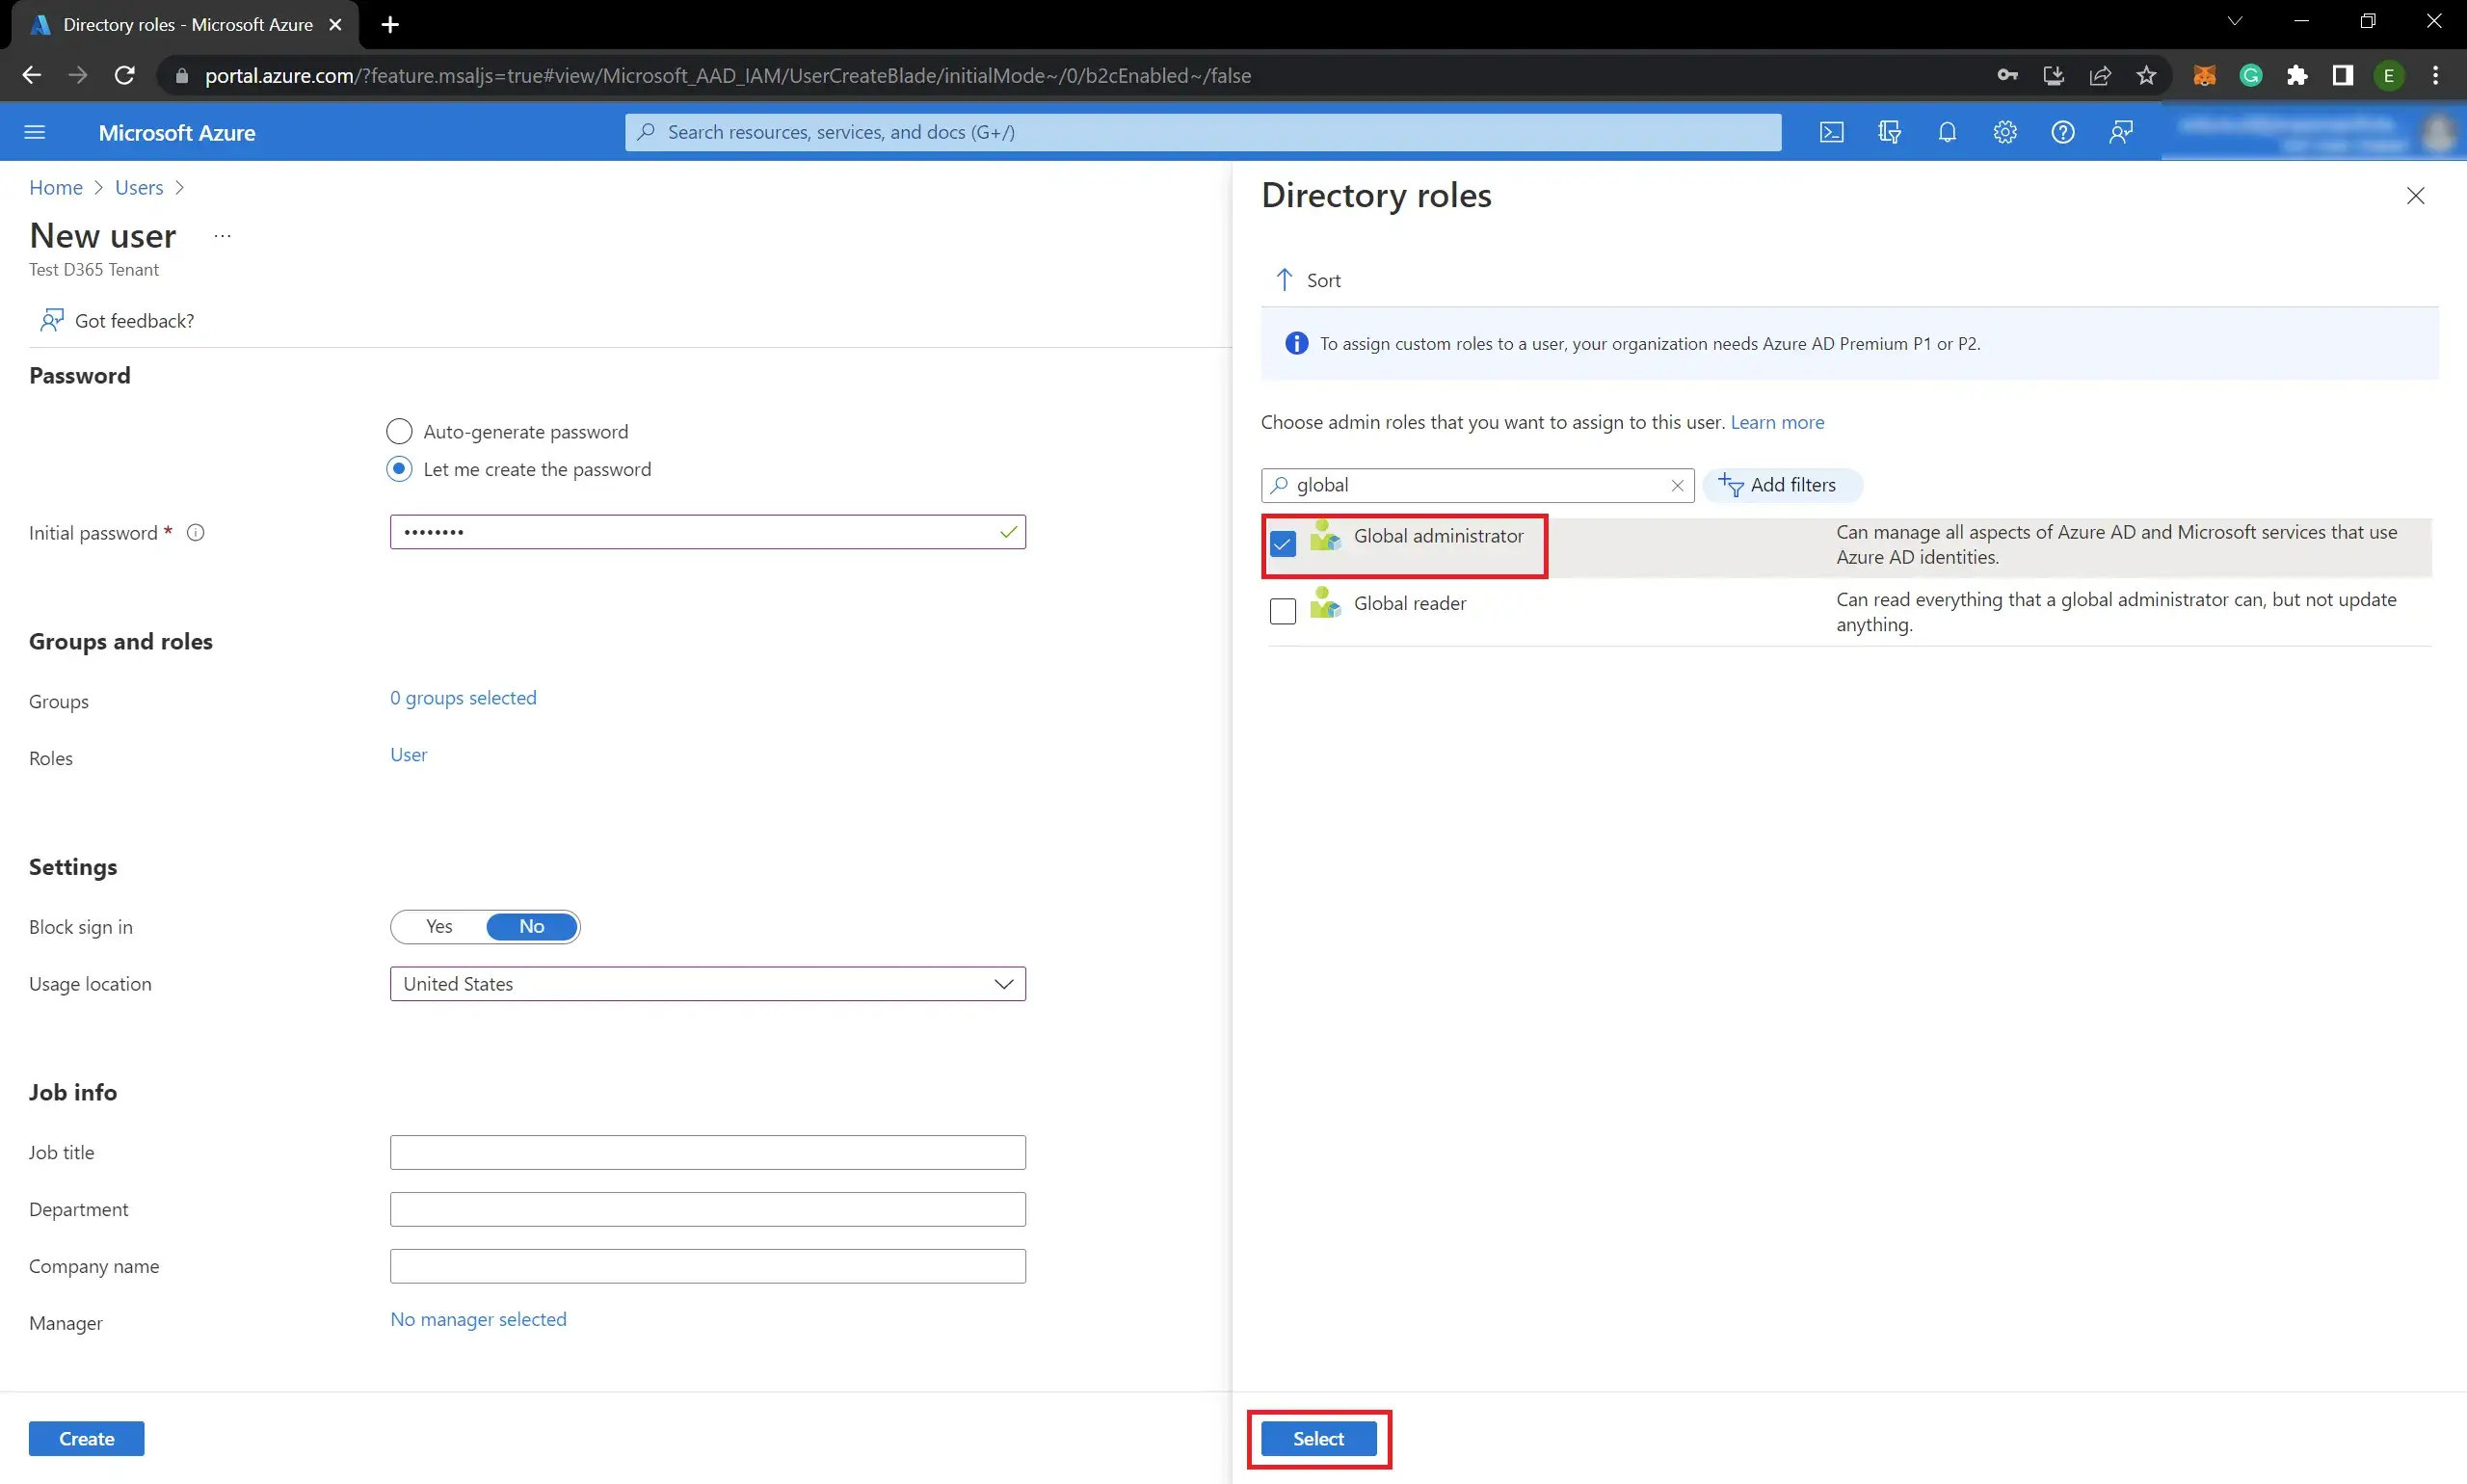 Assign Global administrator role to user Azure tenant